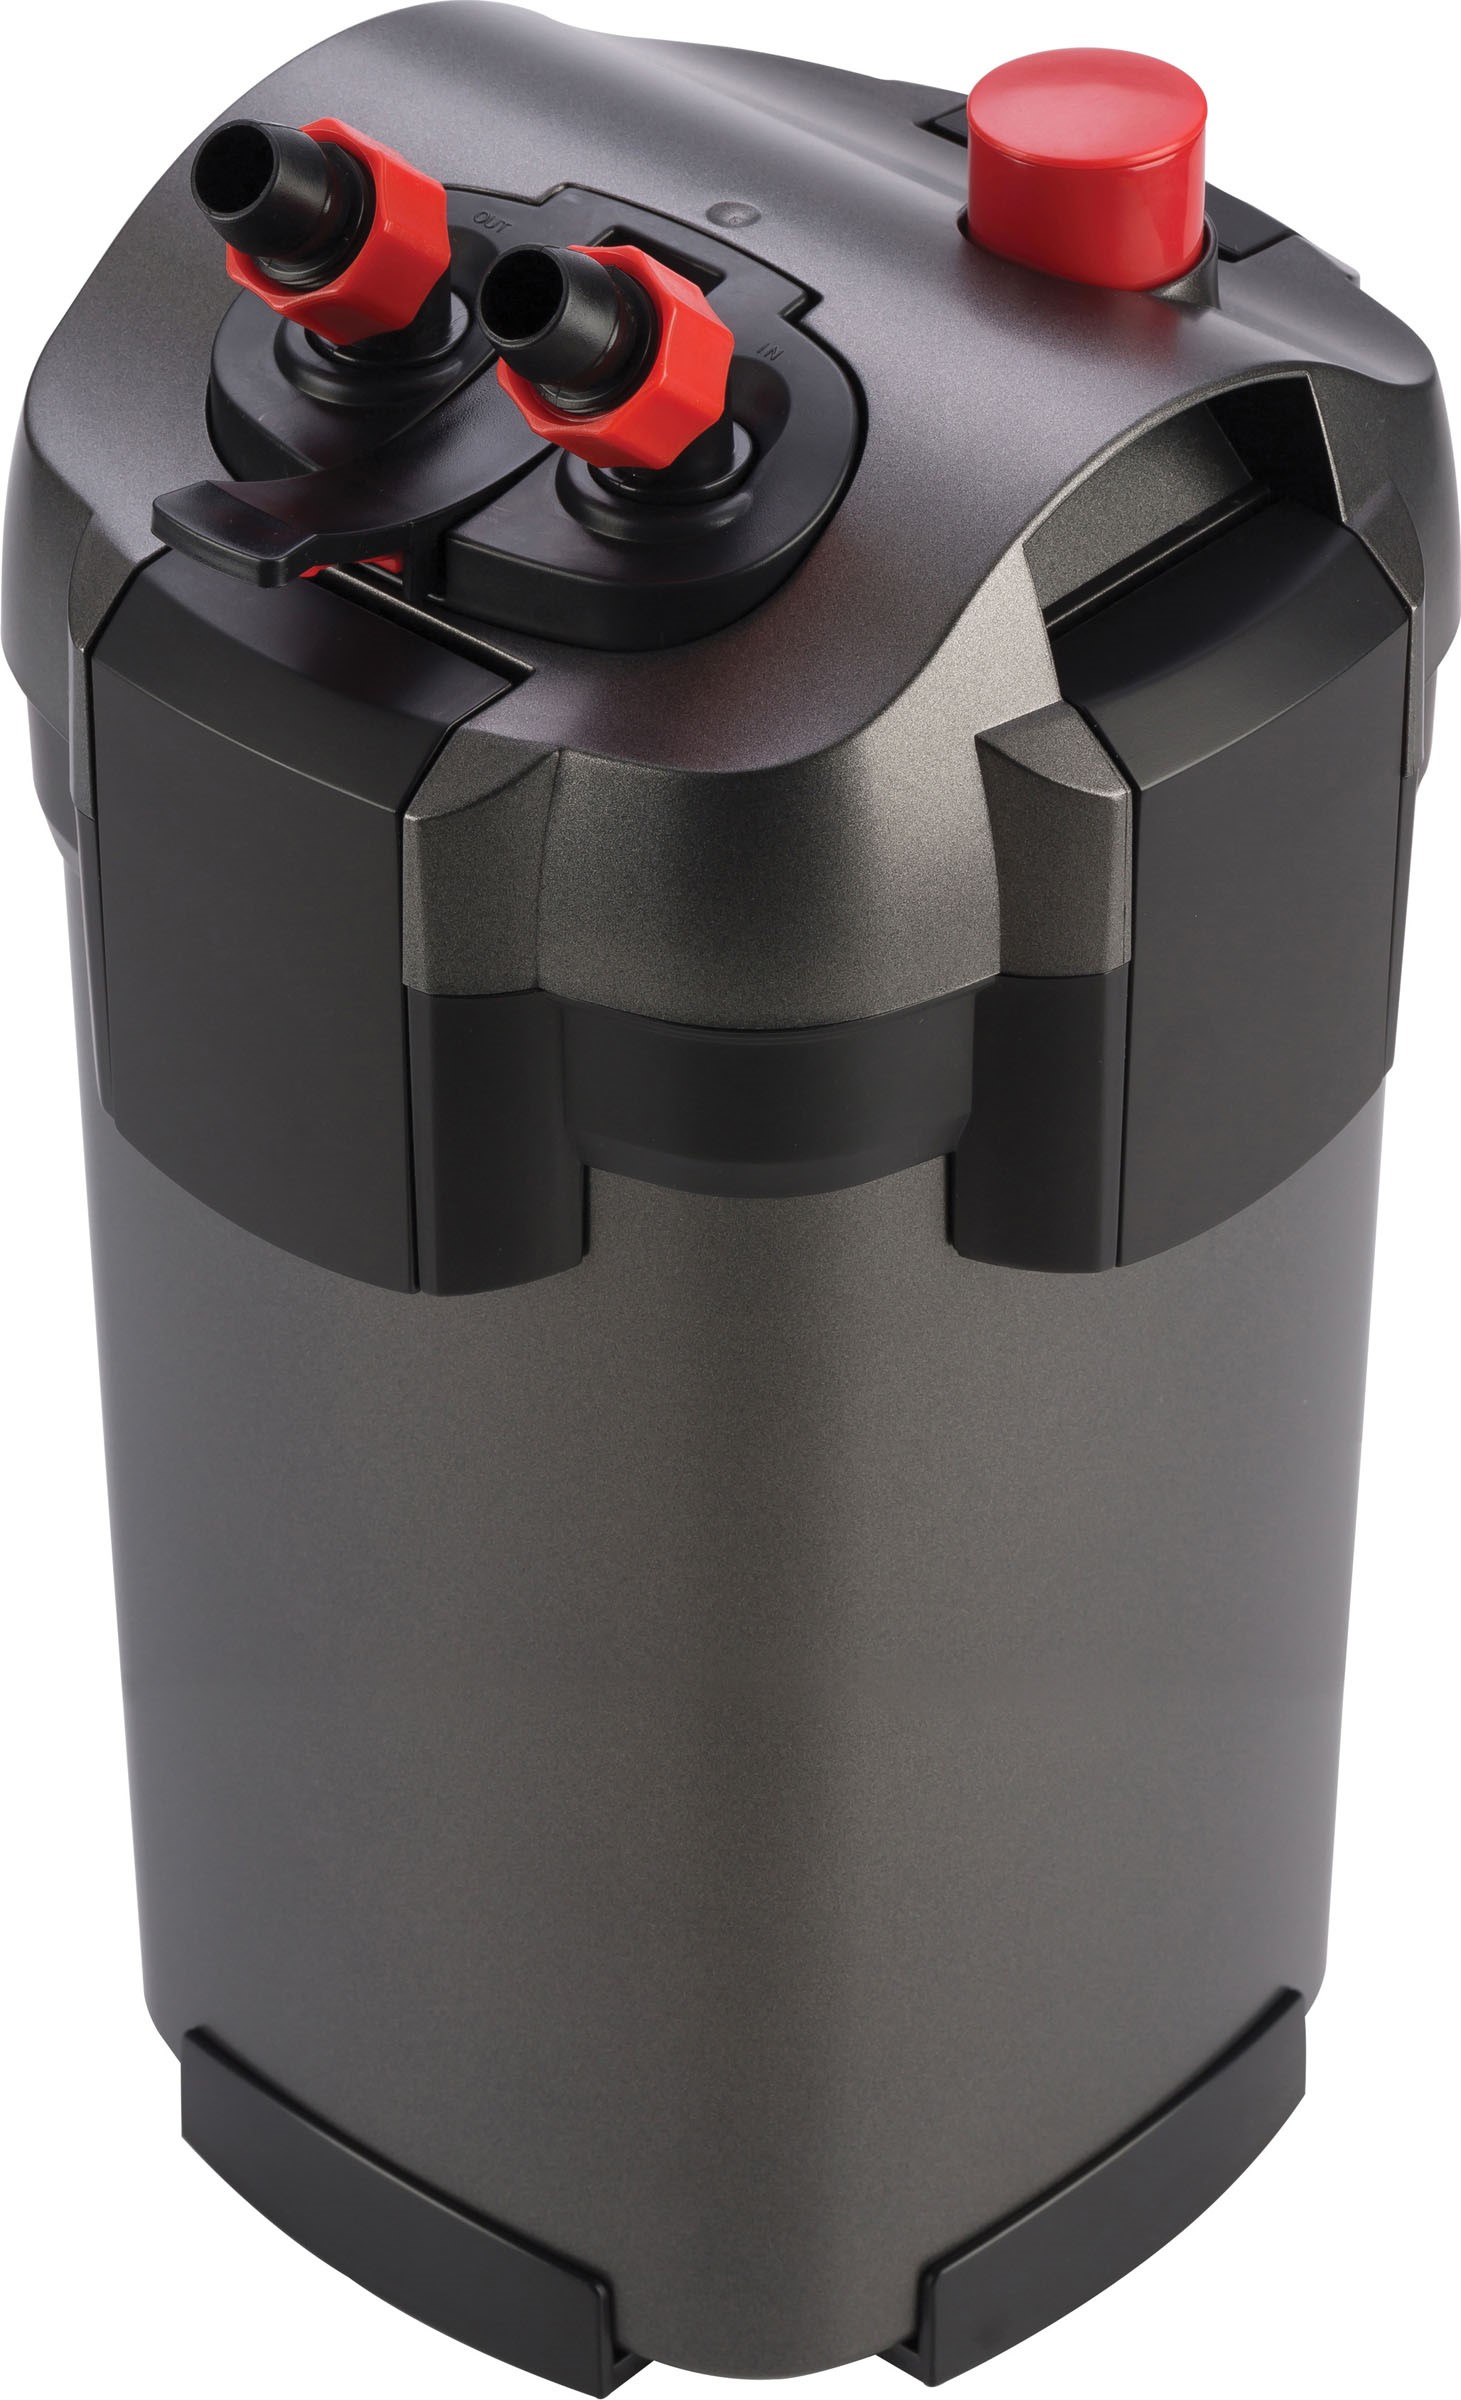 Marineland Magniflow Canister Filter 220 GPH for Aquariums, Easy Maintenance - image 1 of 9